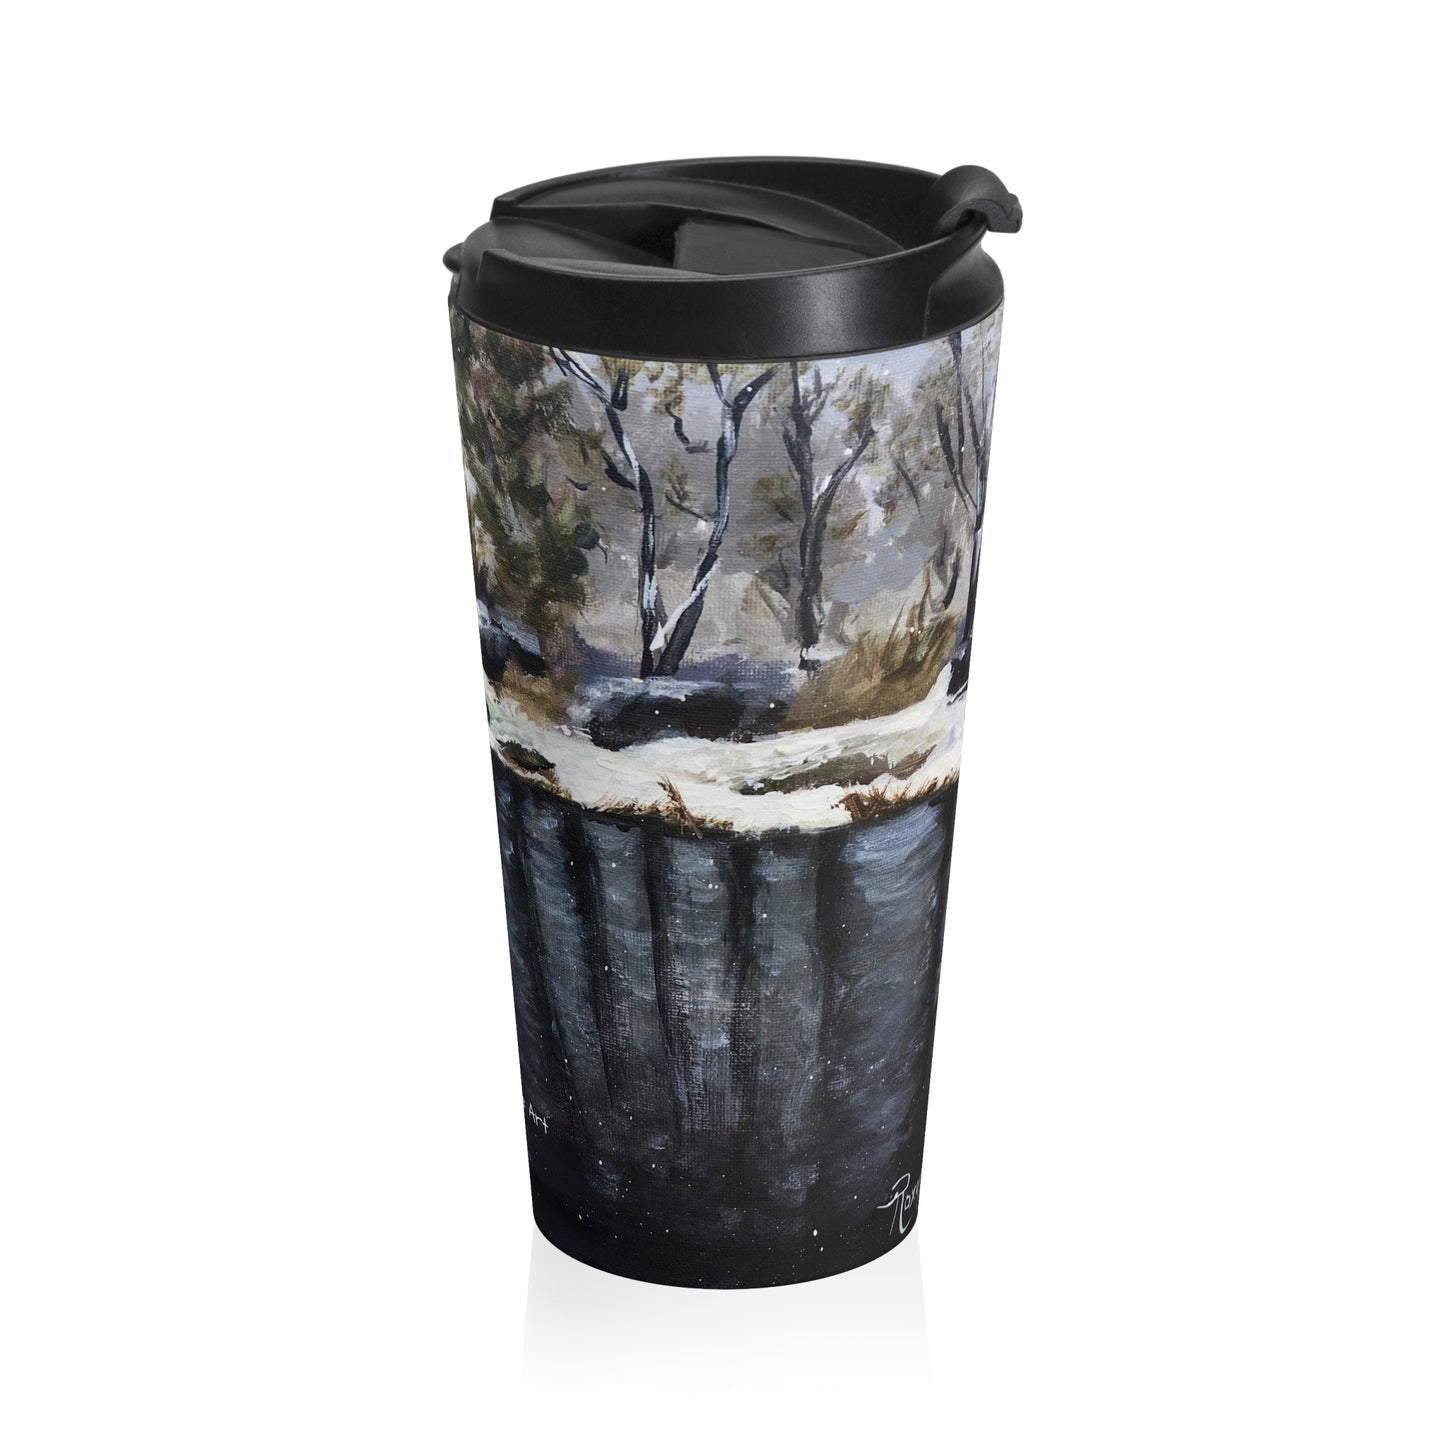 Rose Haven Garden (That day it snowed in Temecula) Stainless Steel Travel Mug